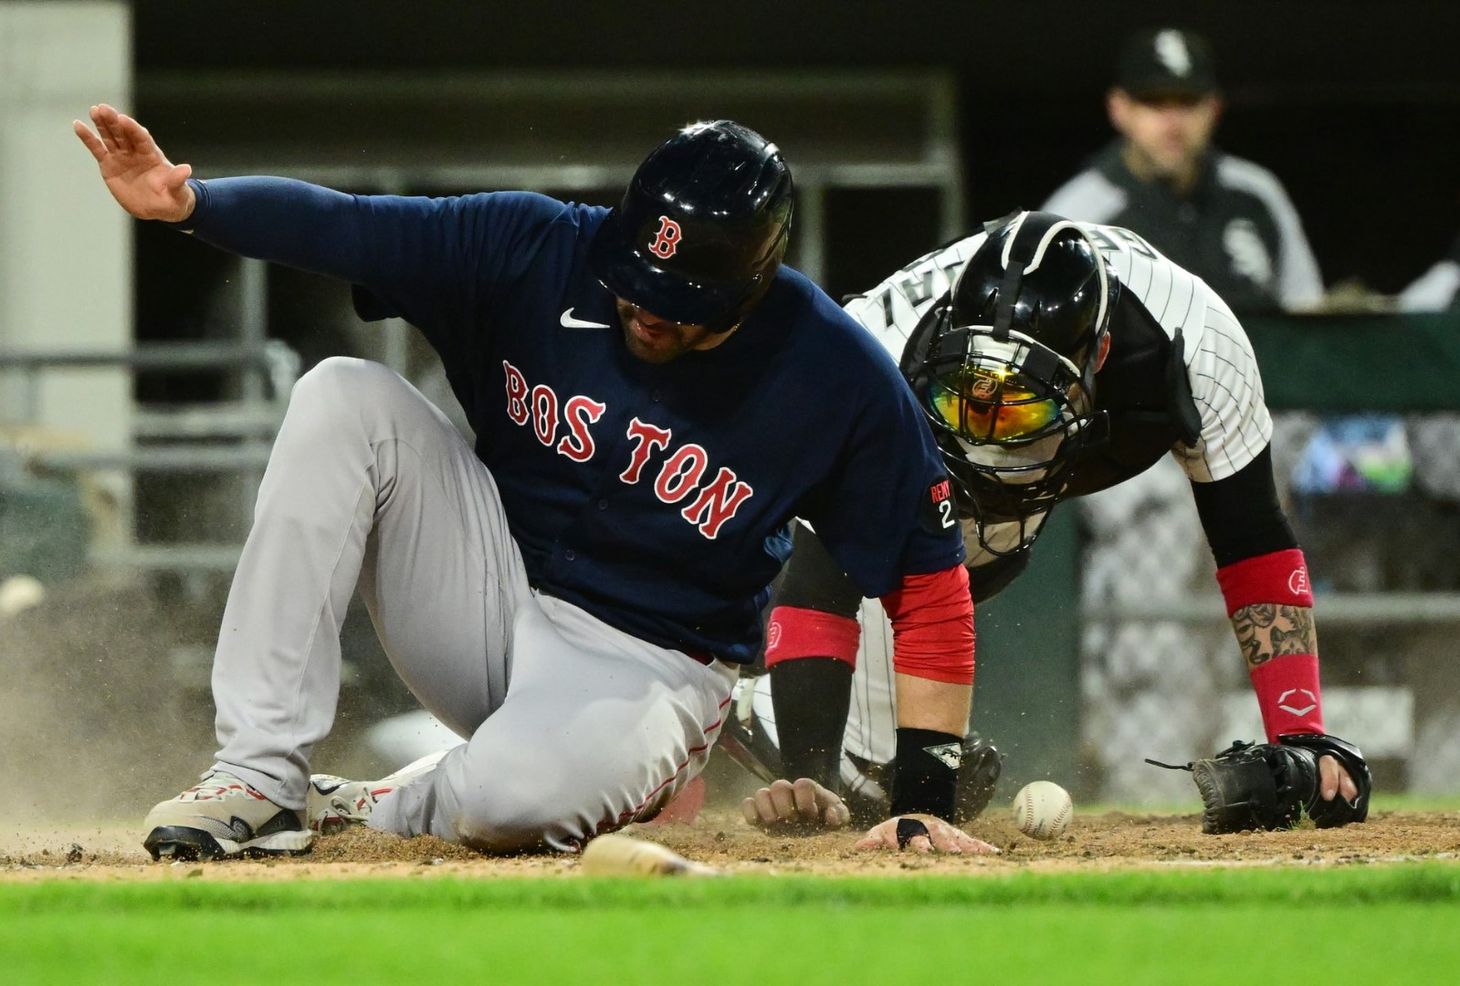 Red Sox pound White Sox 16-3, extend win streak to 6 games